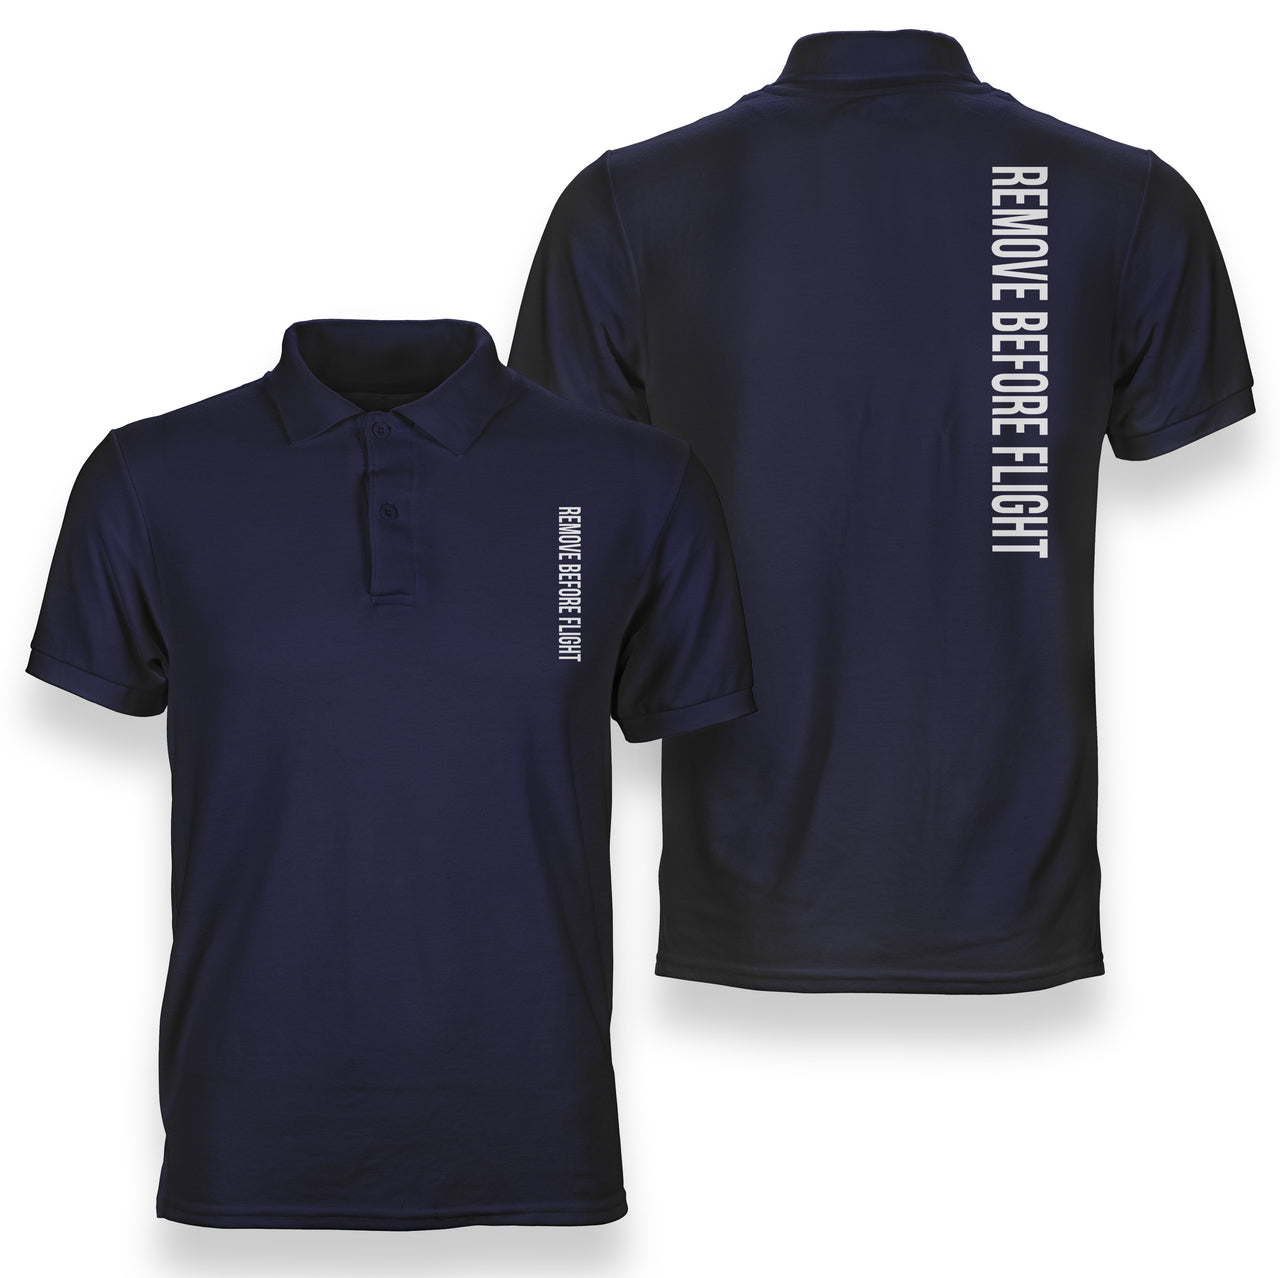 Remove Before Flight 2 Designed Double Side Polo T-Shirts